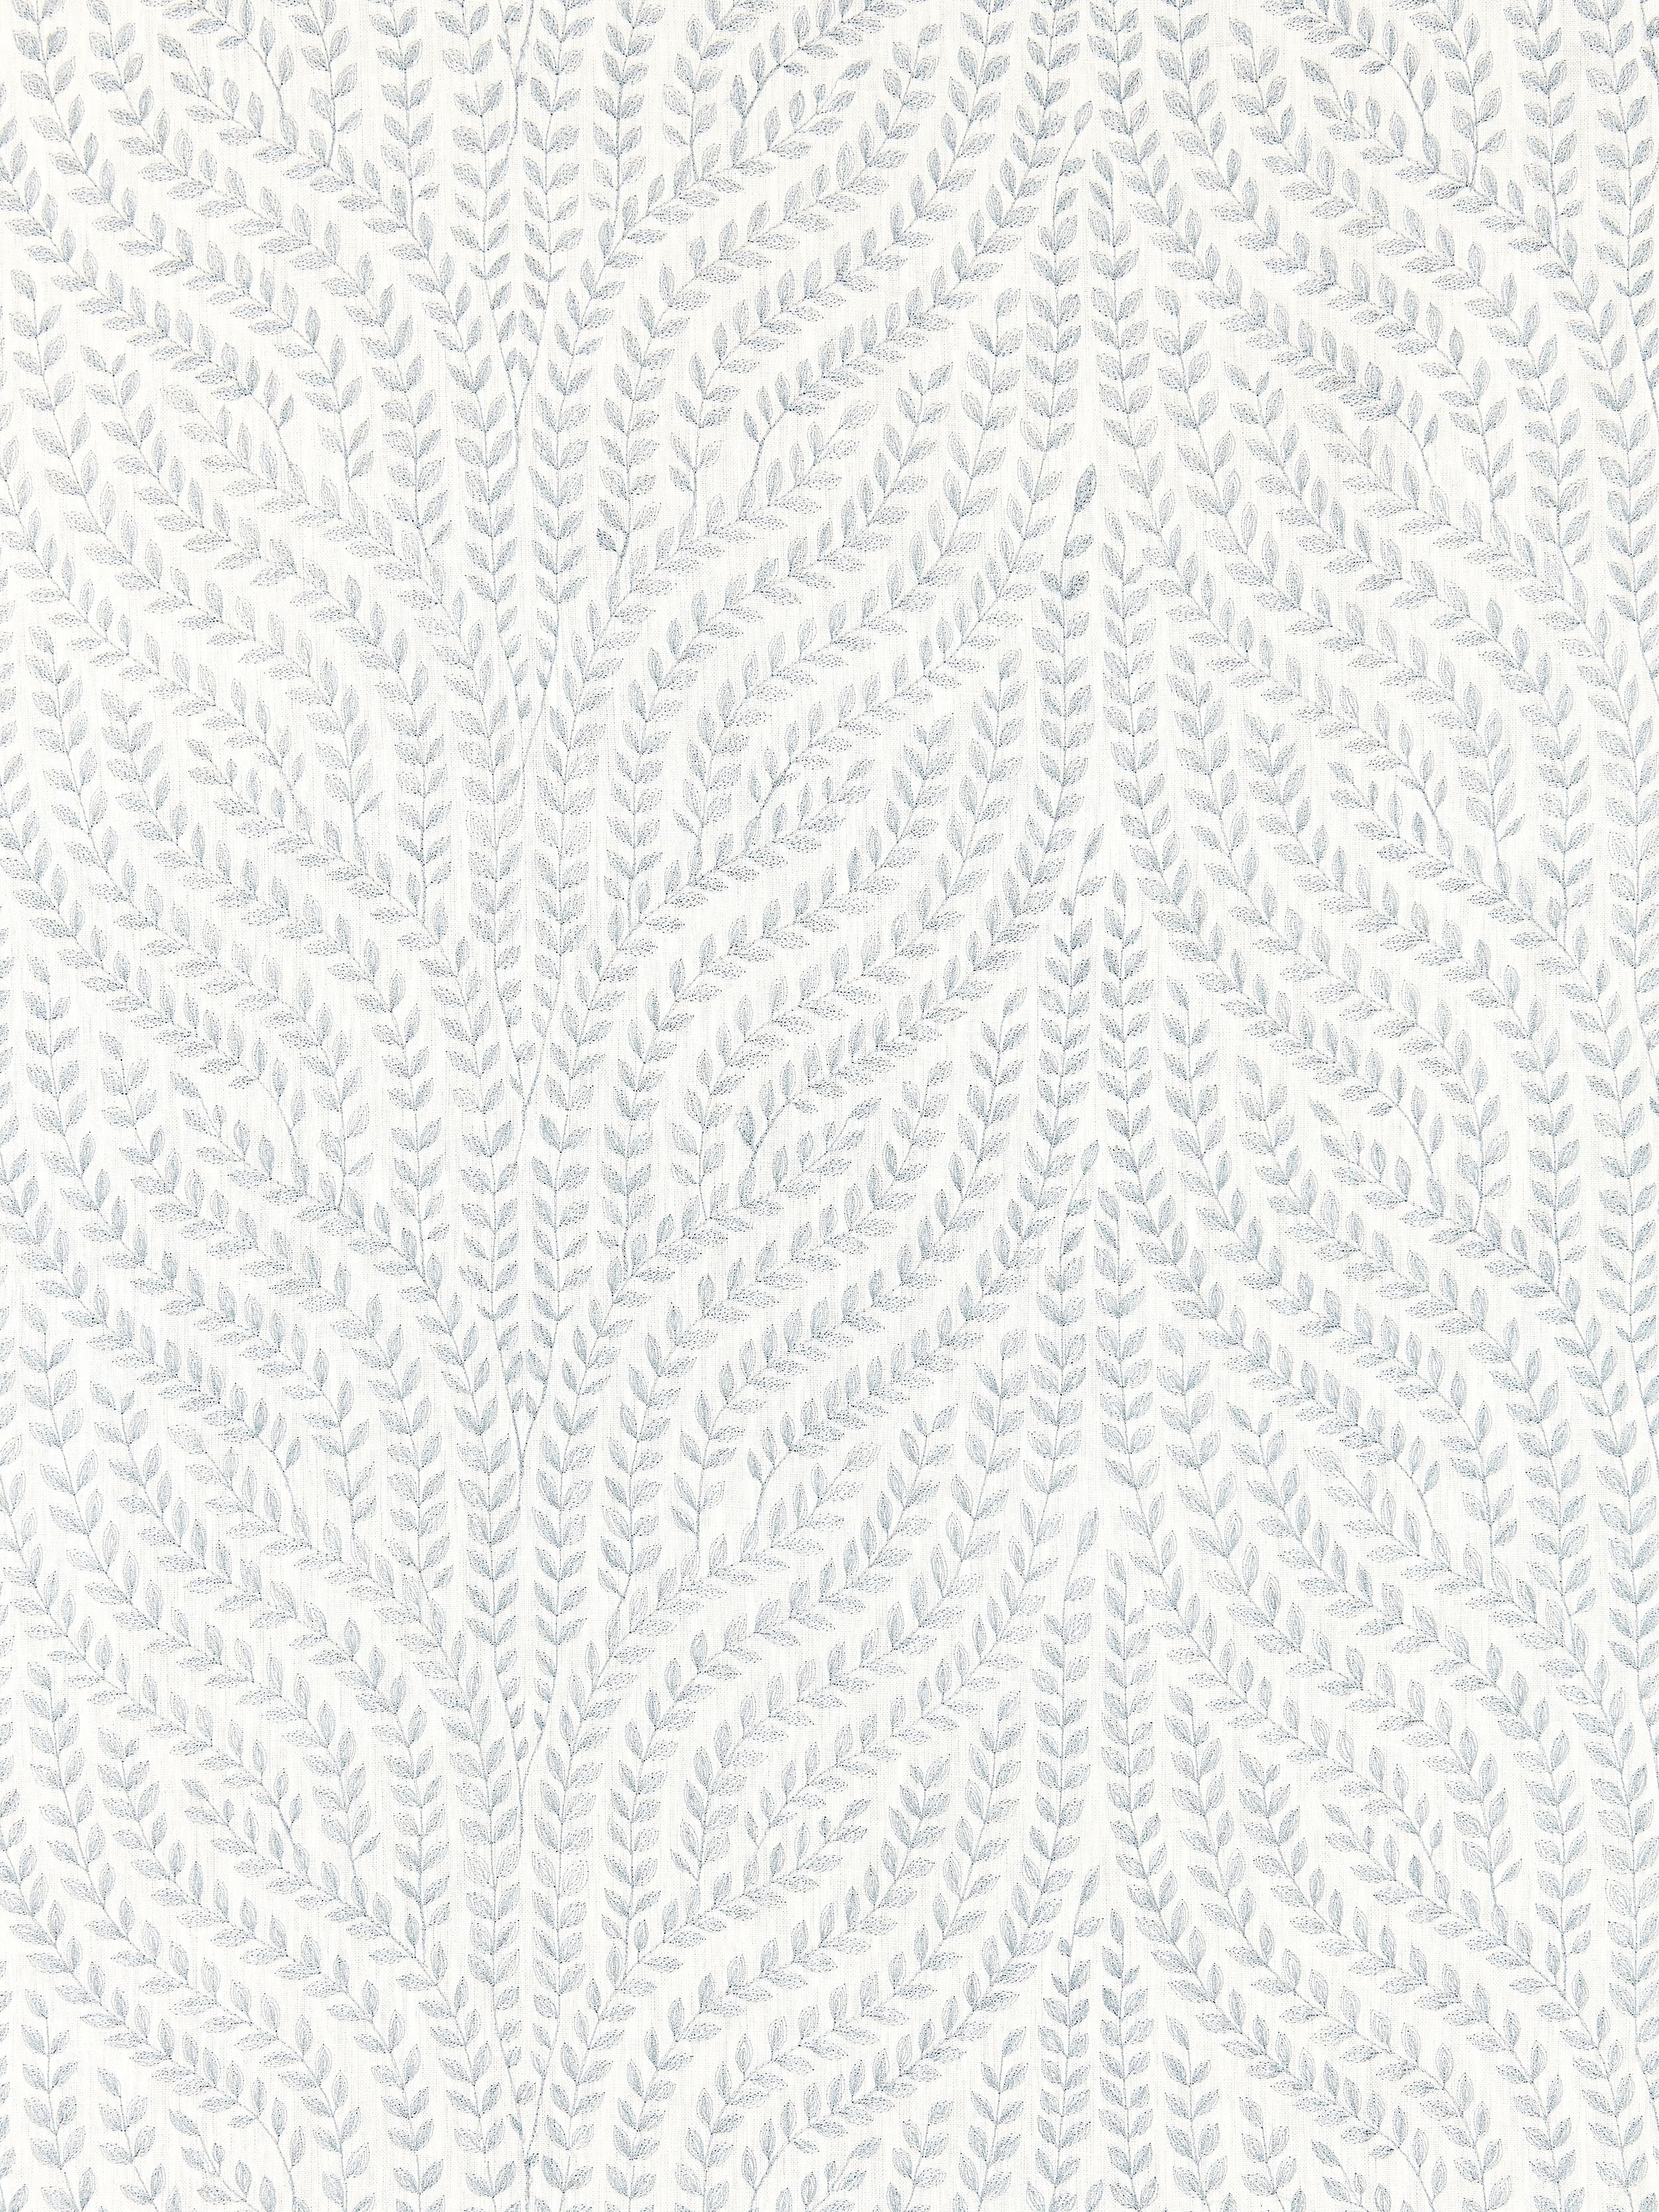 Willow Vine Embroidery fabric in aquamarine color - pattern number SC 000127125 - by Scalamandre in the Scalamandre Fabrics Book 1 collection